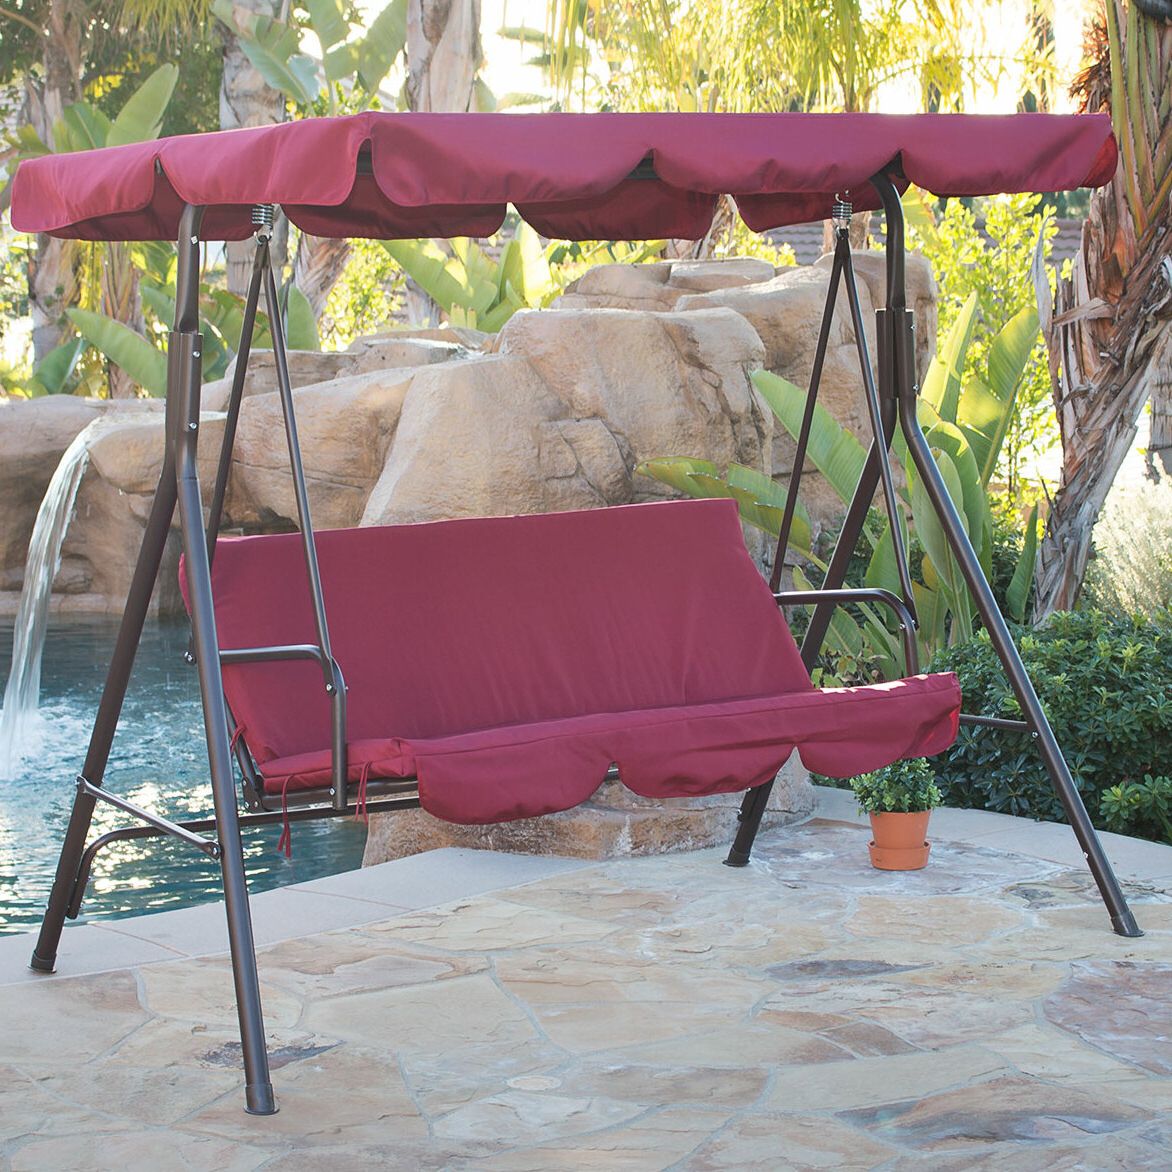 Wayfair Intended For Recent Outdoor Canopy Hammock Porch Swings With Stand (View 27 of 30)